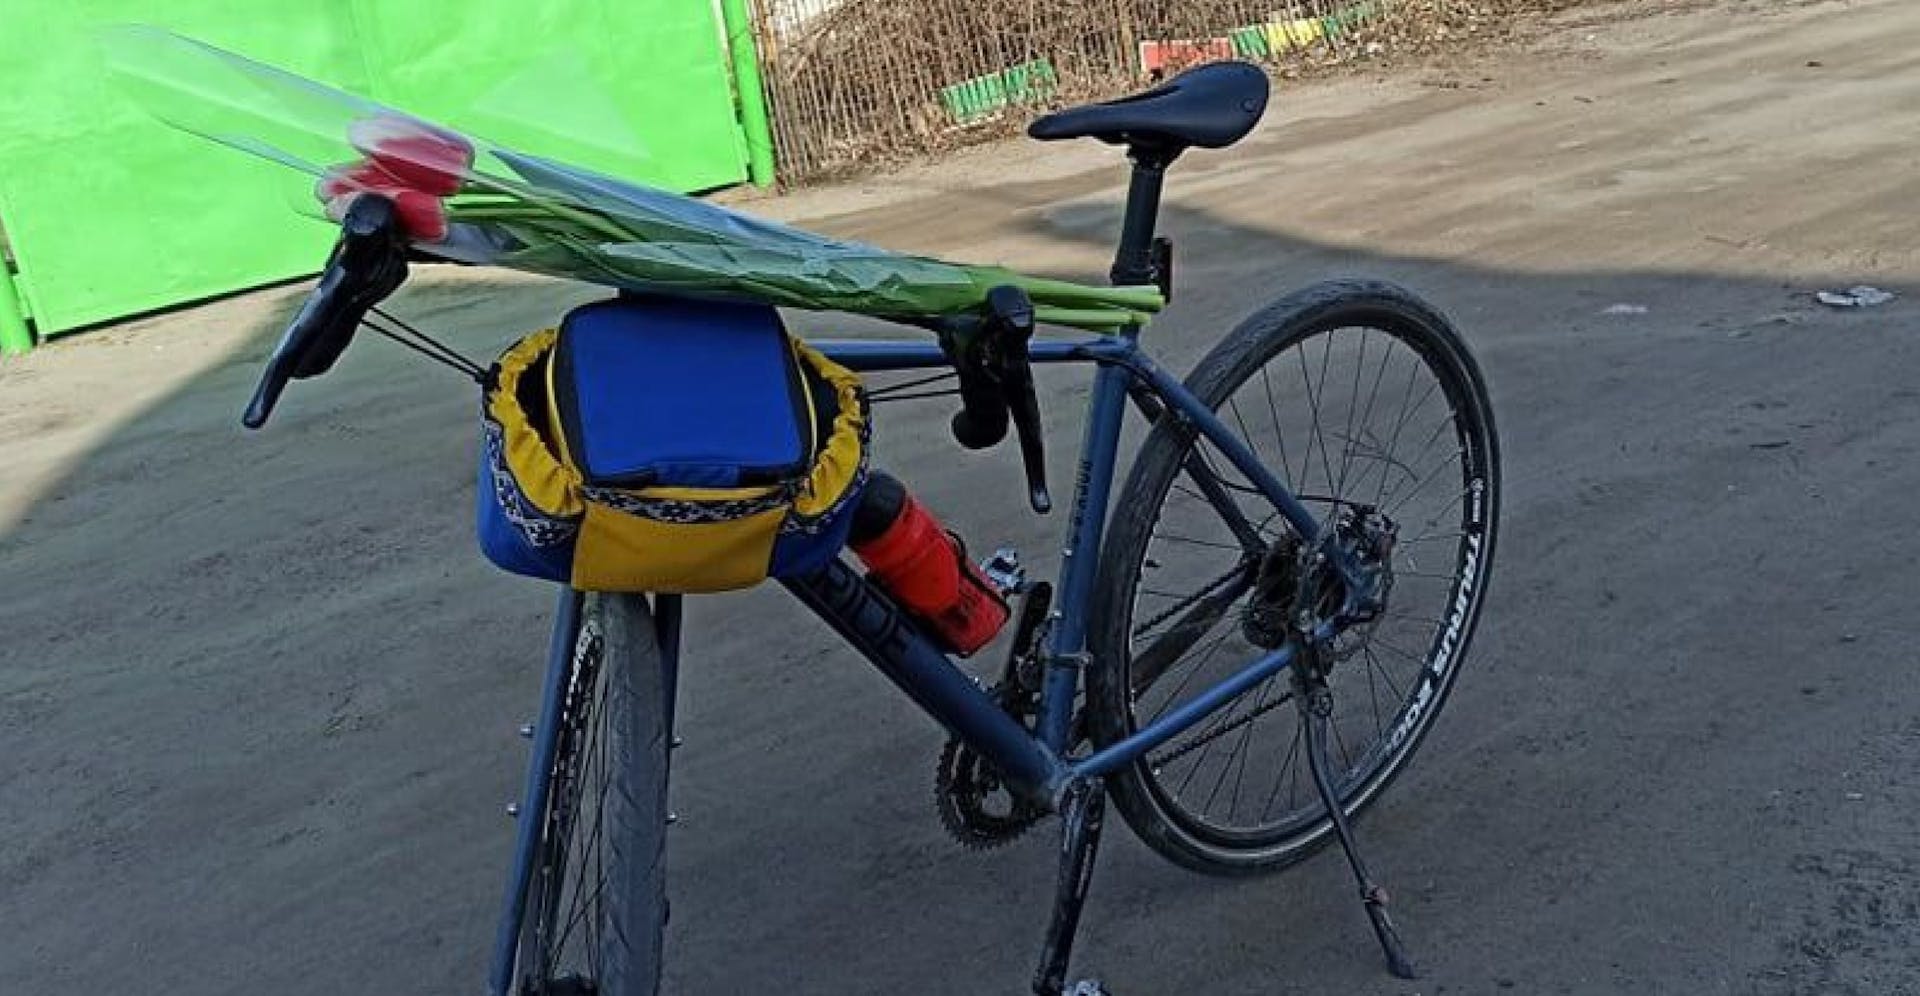 Bicycle with framepack bag and bumBag